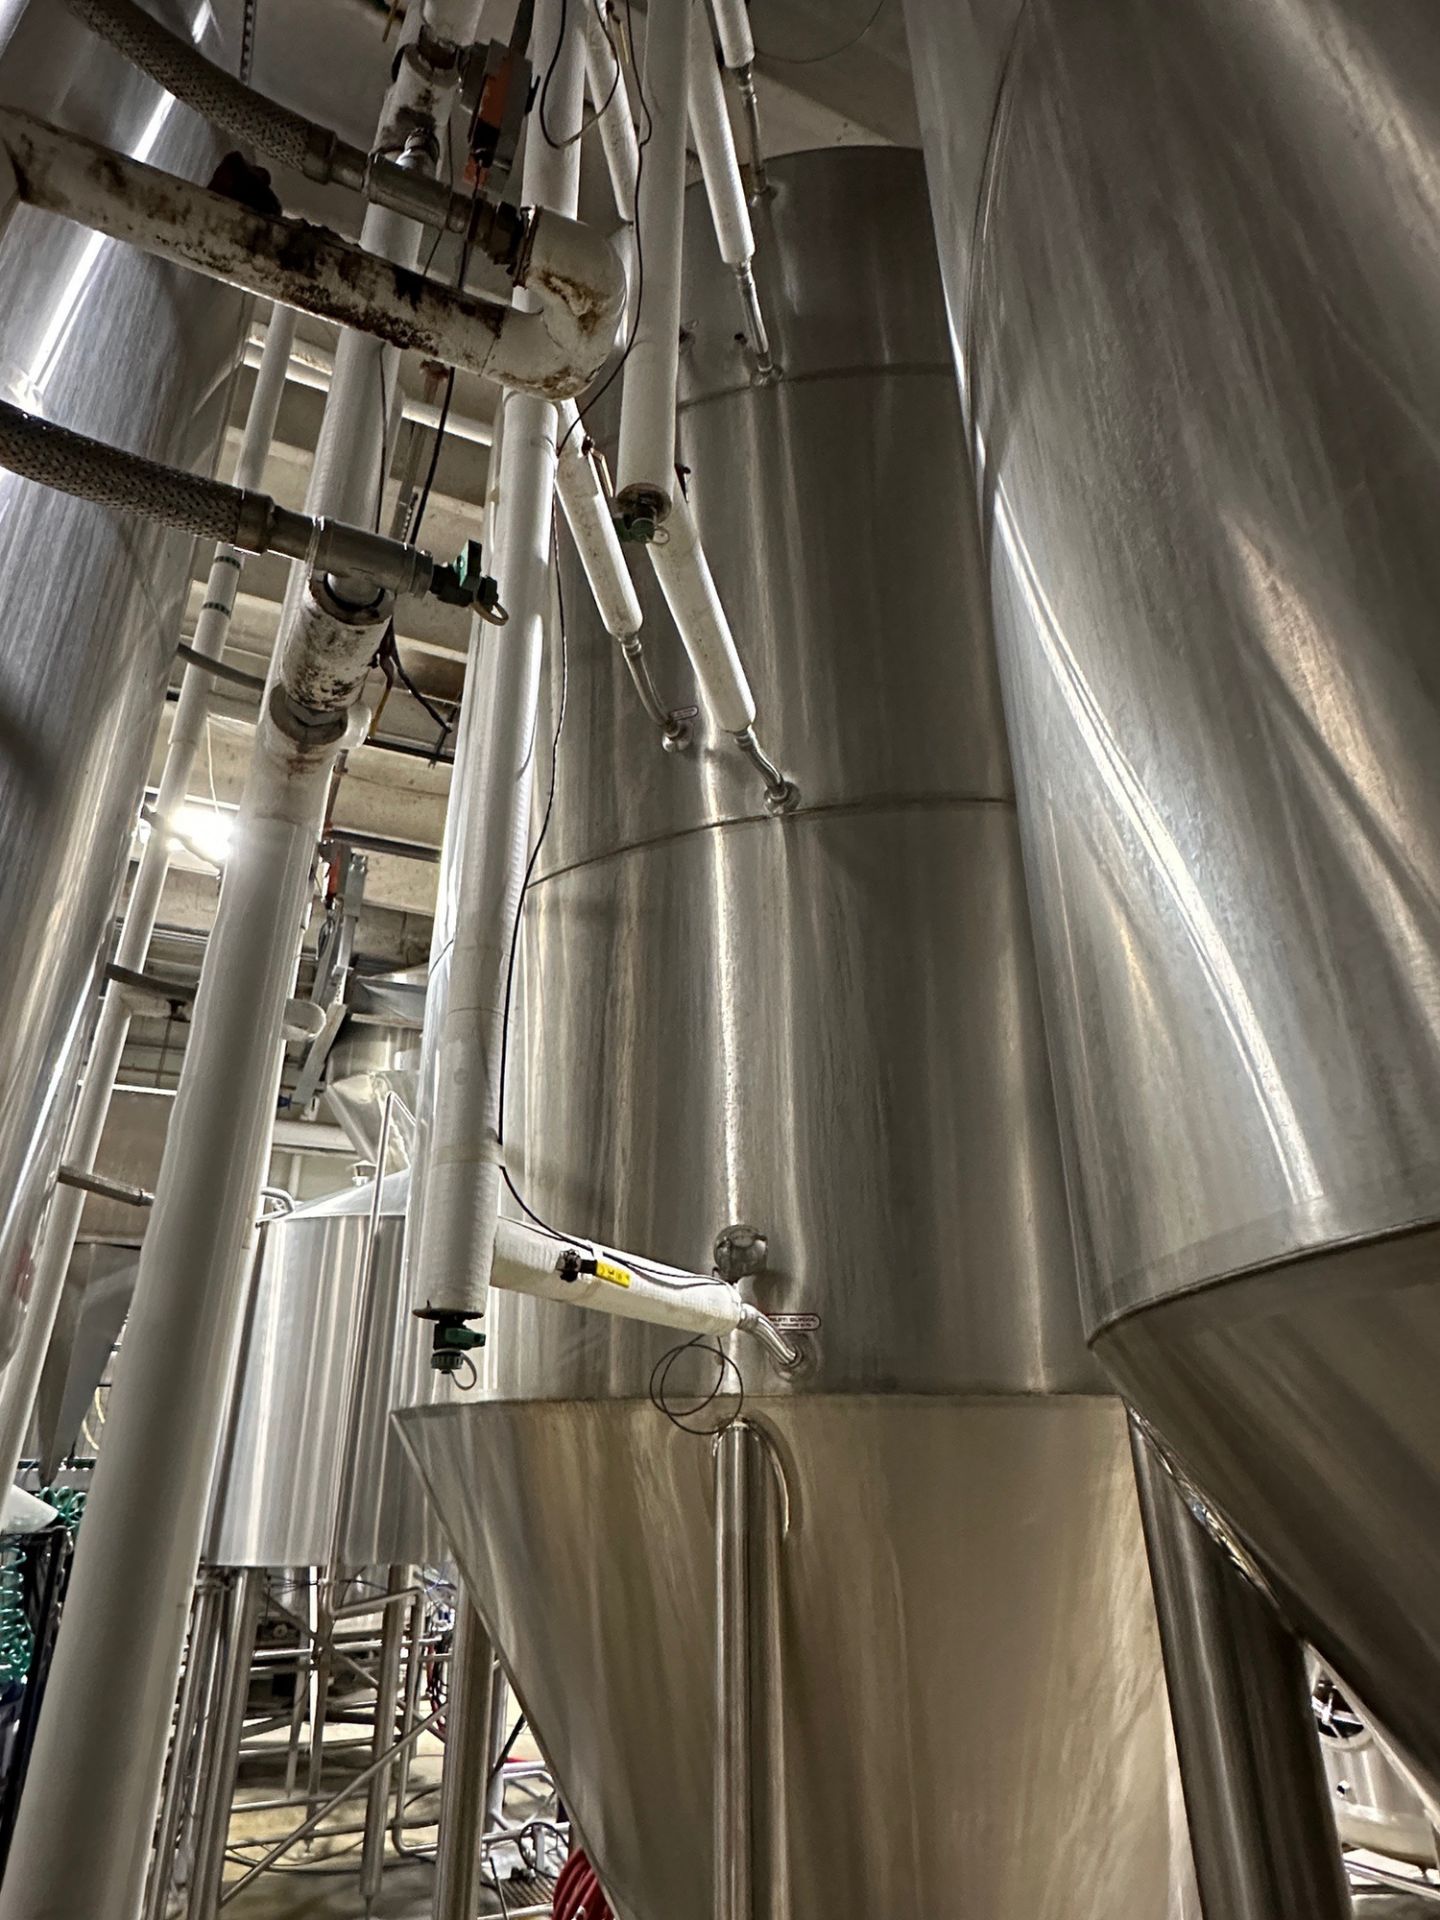 Silver State Stainless 120 BBL Stainless Steel Fermentation Tank - Cone Bottom, Gly | Rig Fee $2150 - Image 2 of 6